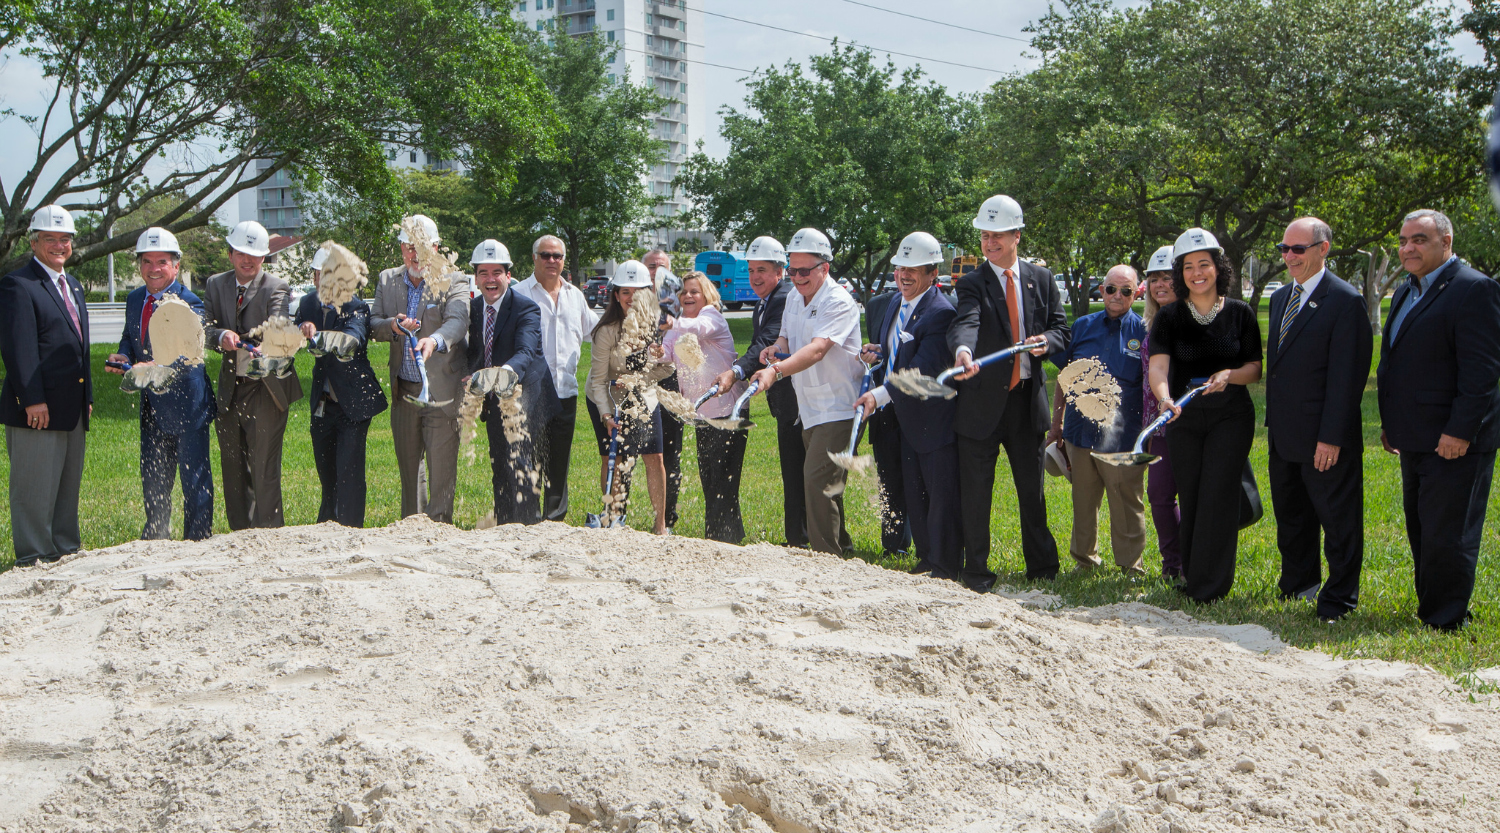 Local and national leaders, including Congresswoman Ileana Ros-Lehtinen and Sweetwater Mayor Orlando Lopez, gathered at FIU to break ground for the new bridge